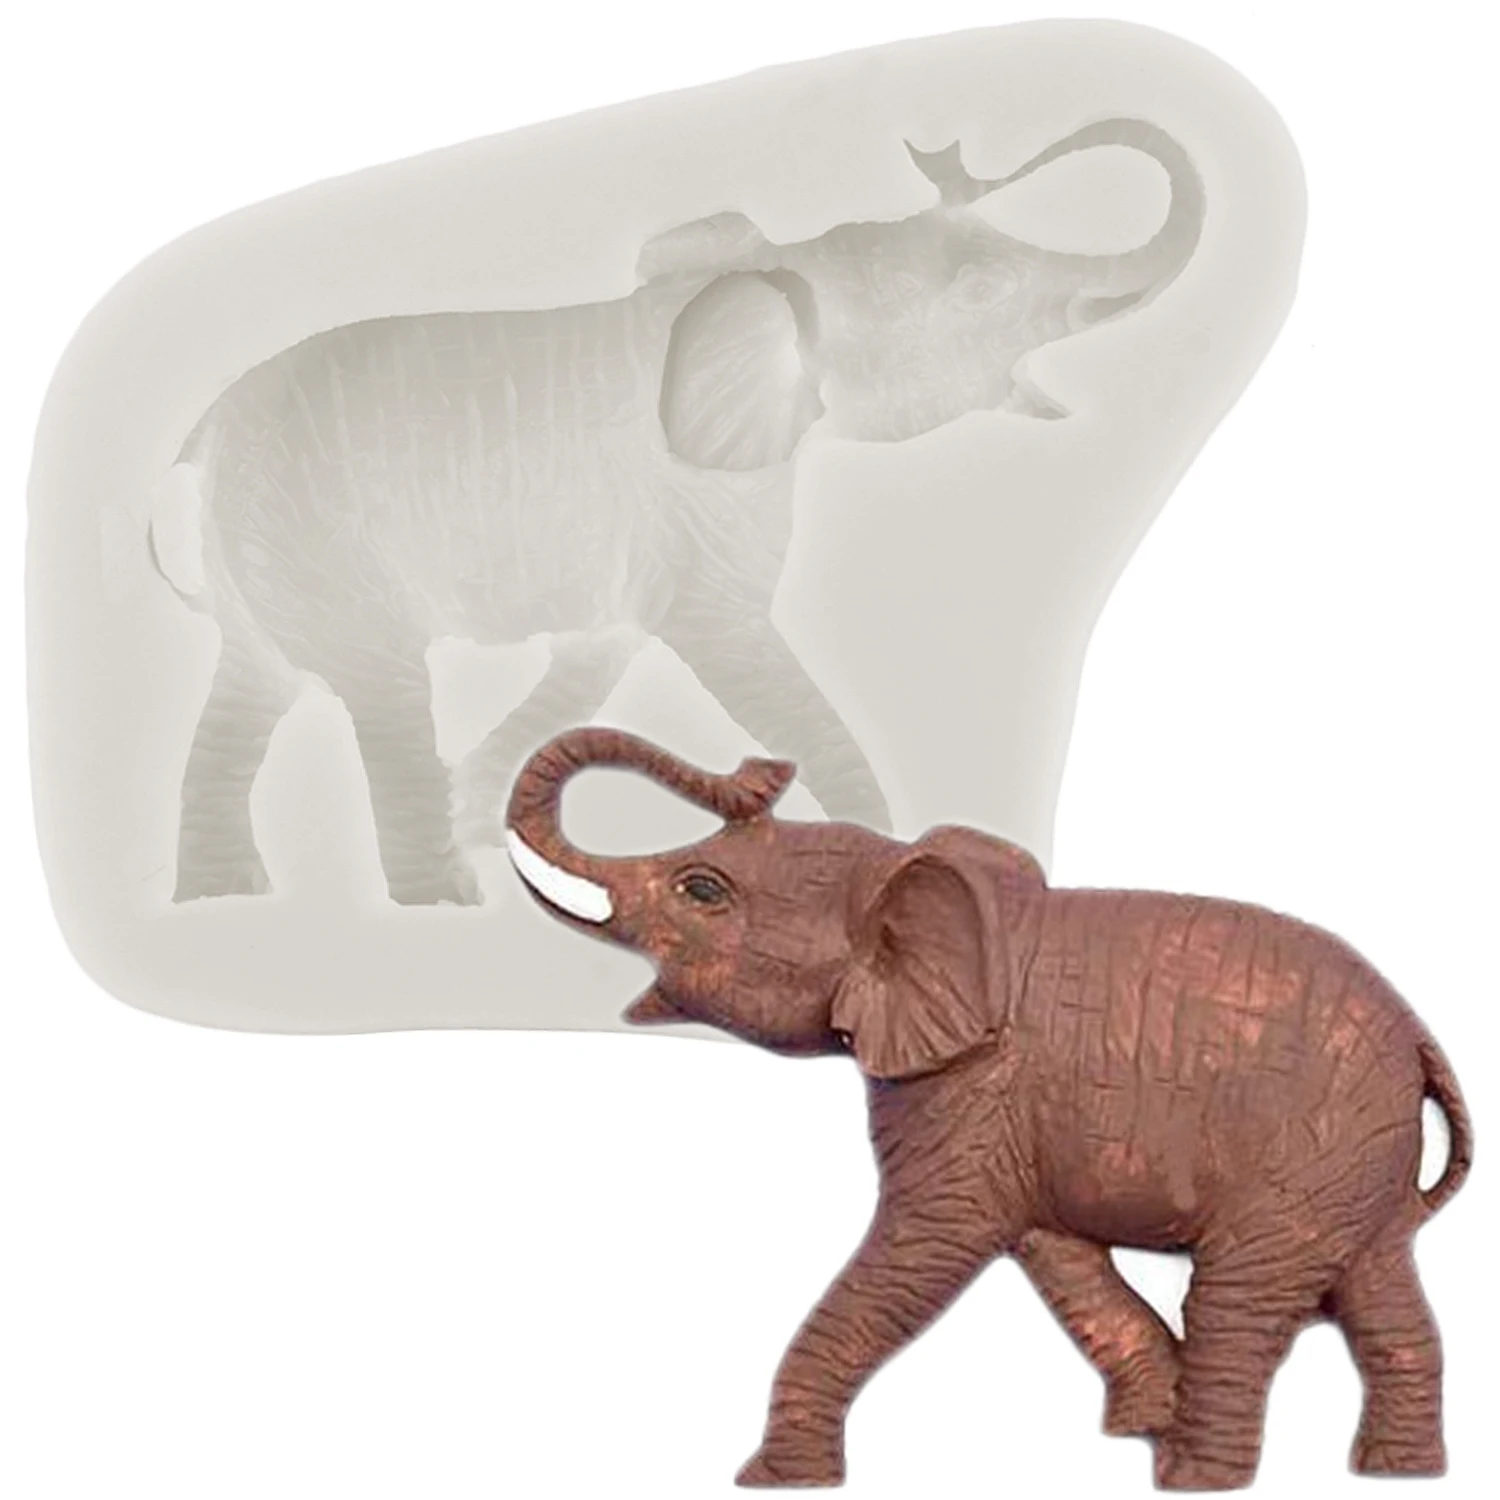 

Elephant Silicone Mold Sugarcraft Fondant Cake Decorating Tools Chocolate Gumpaste Moulds Candy Mould Polymer Clay Molds